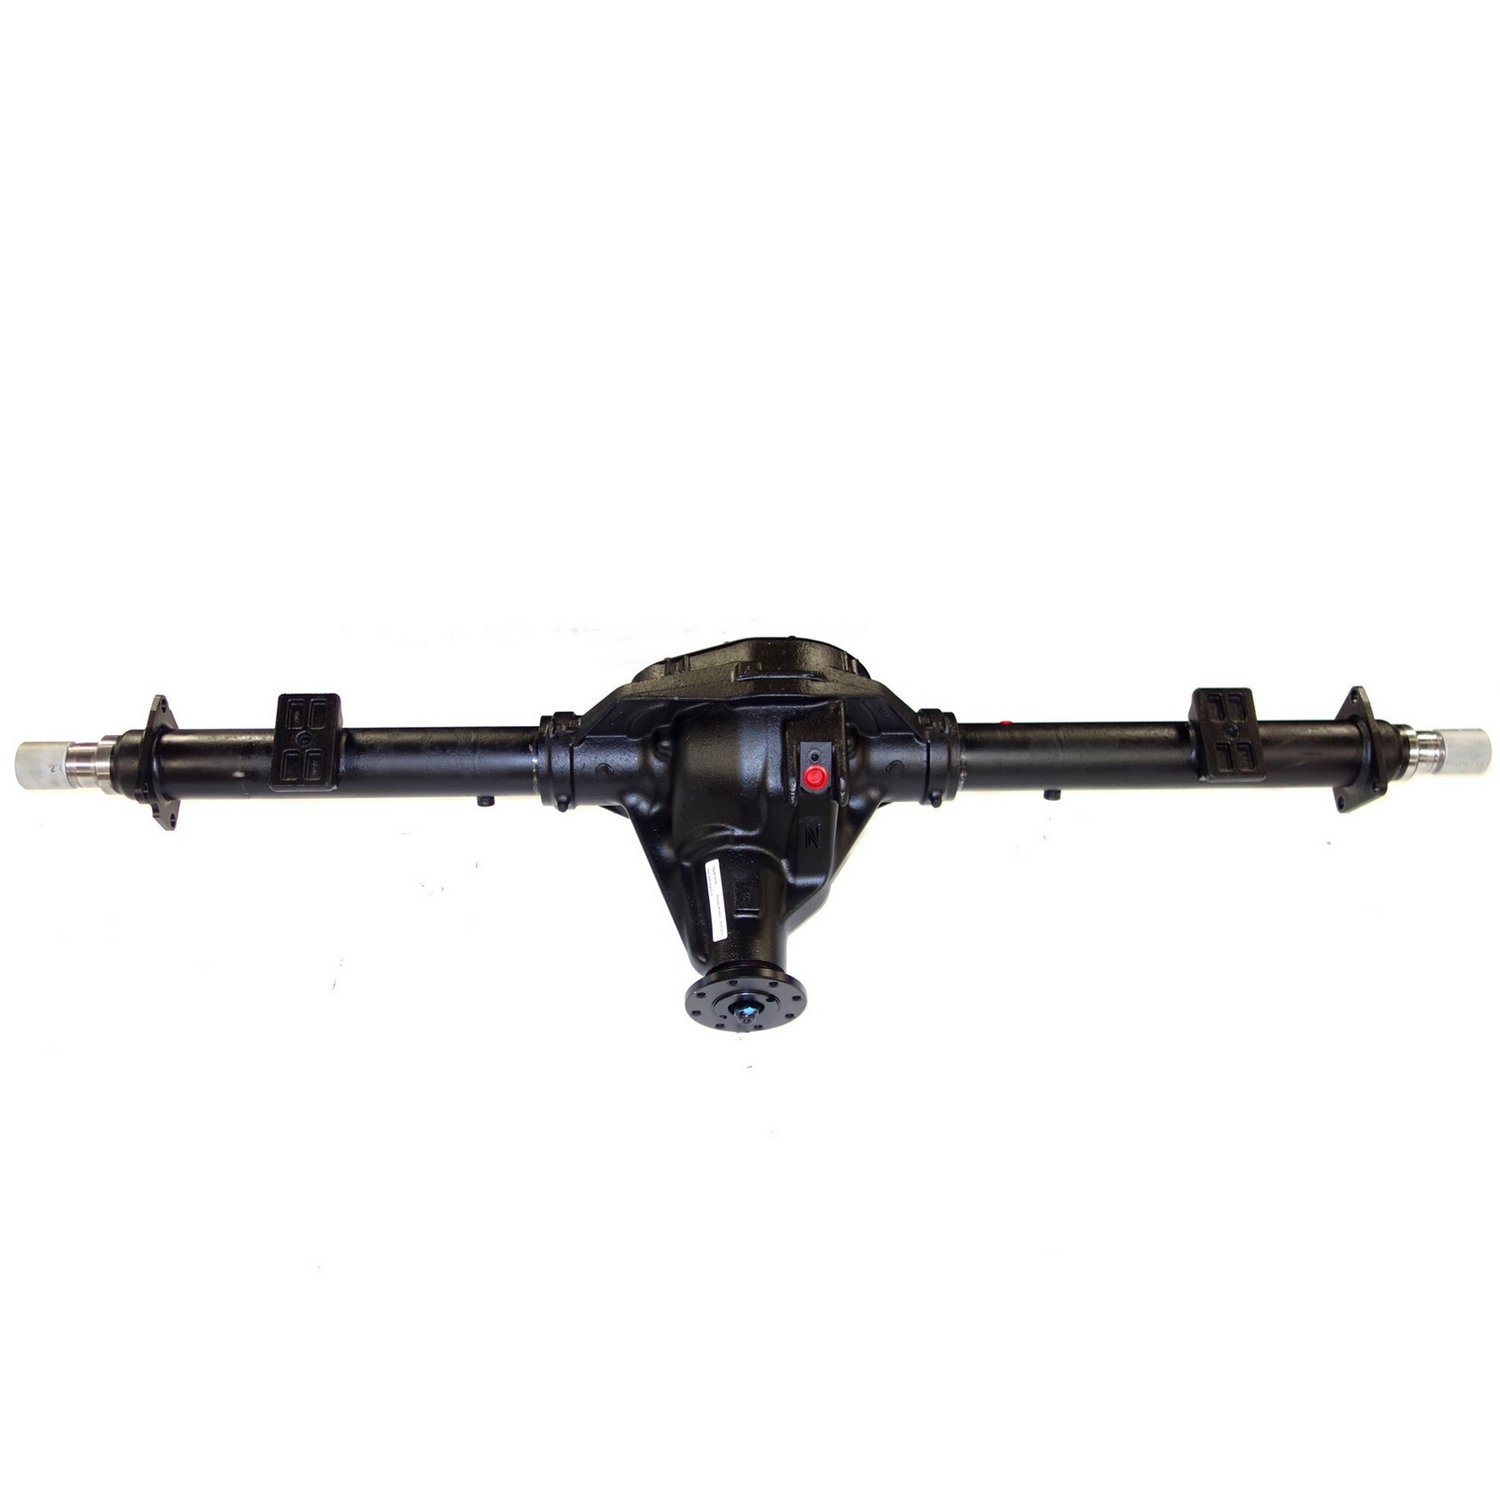 Remanufactured Axle Assy for 10.25" 87-97 F250 & F350 3.55 , ABS, SRW, Ff, Posi LSD